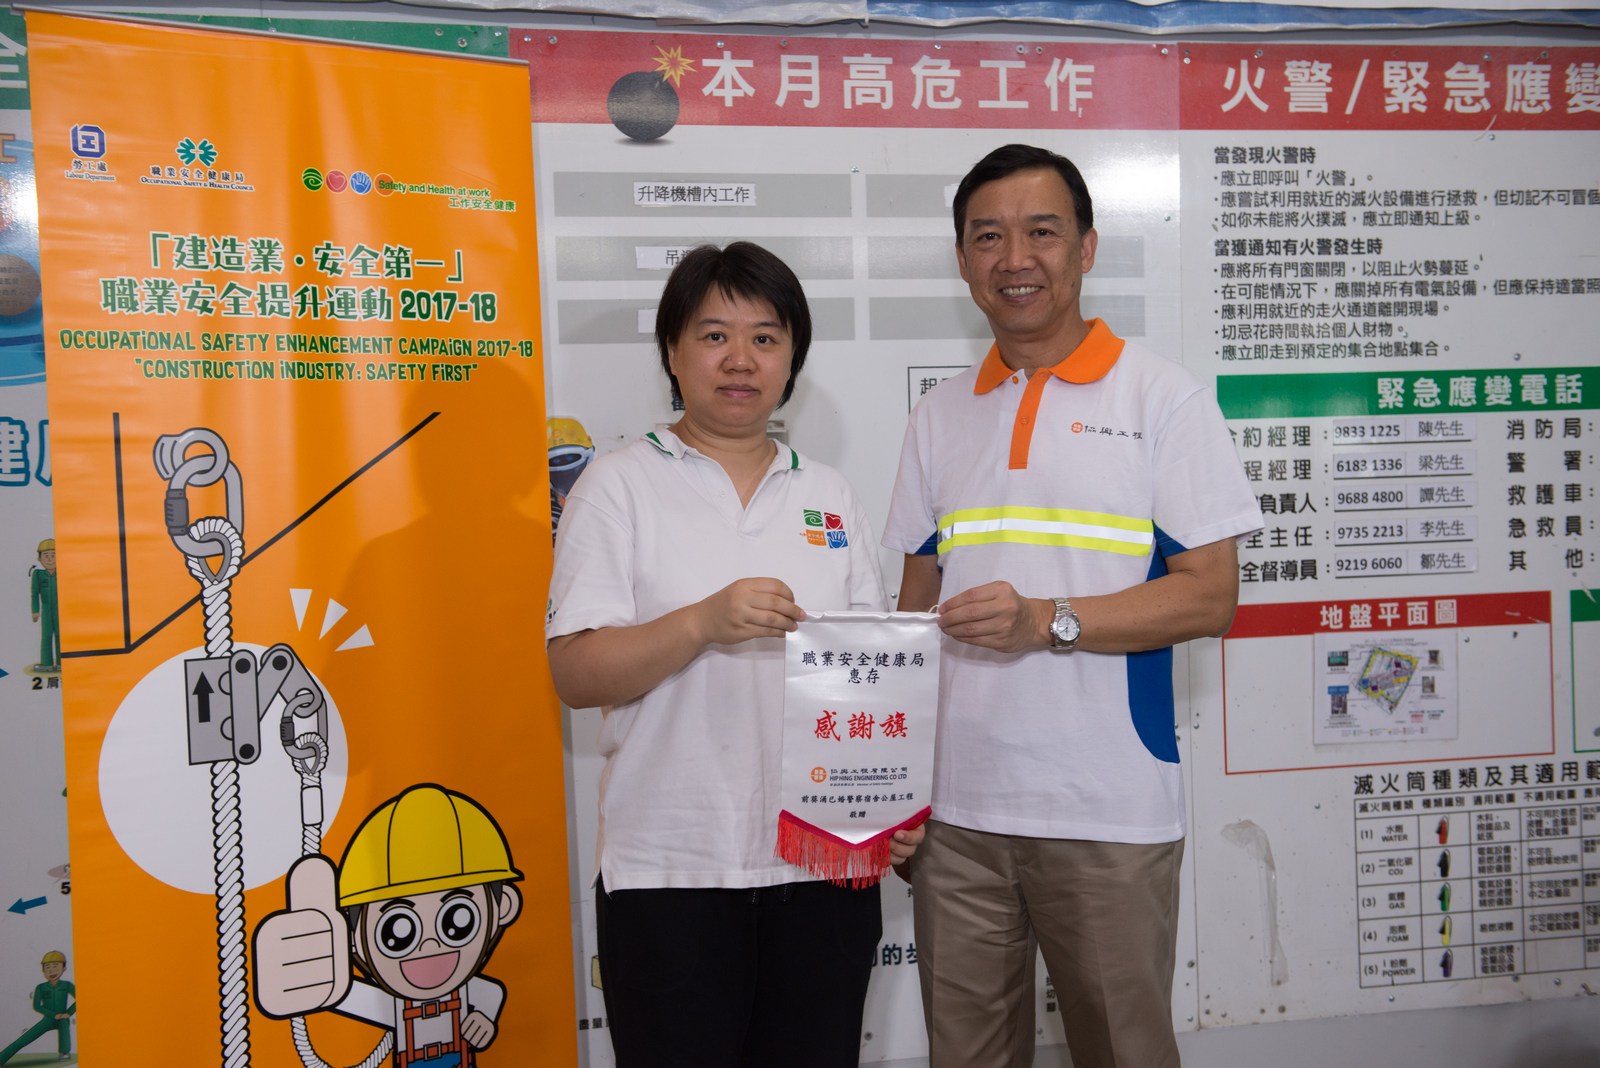 Mr TC Chu, Managing Director of Hip Hing Construction, presents commemorative pennant to the representative of Occupational Safety and Health Council